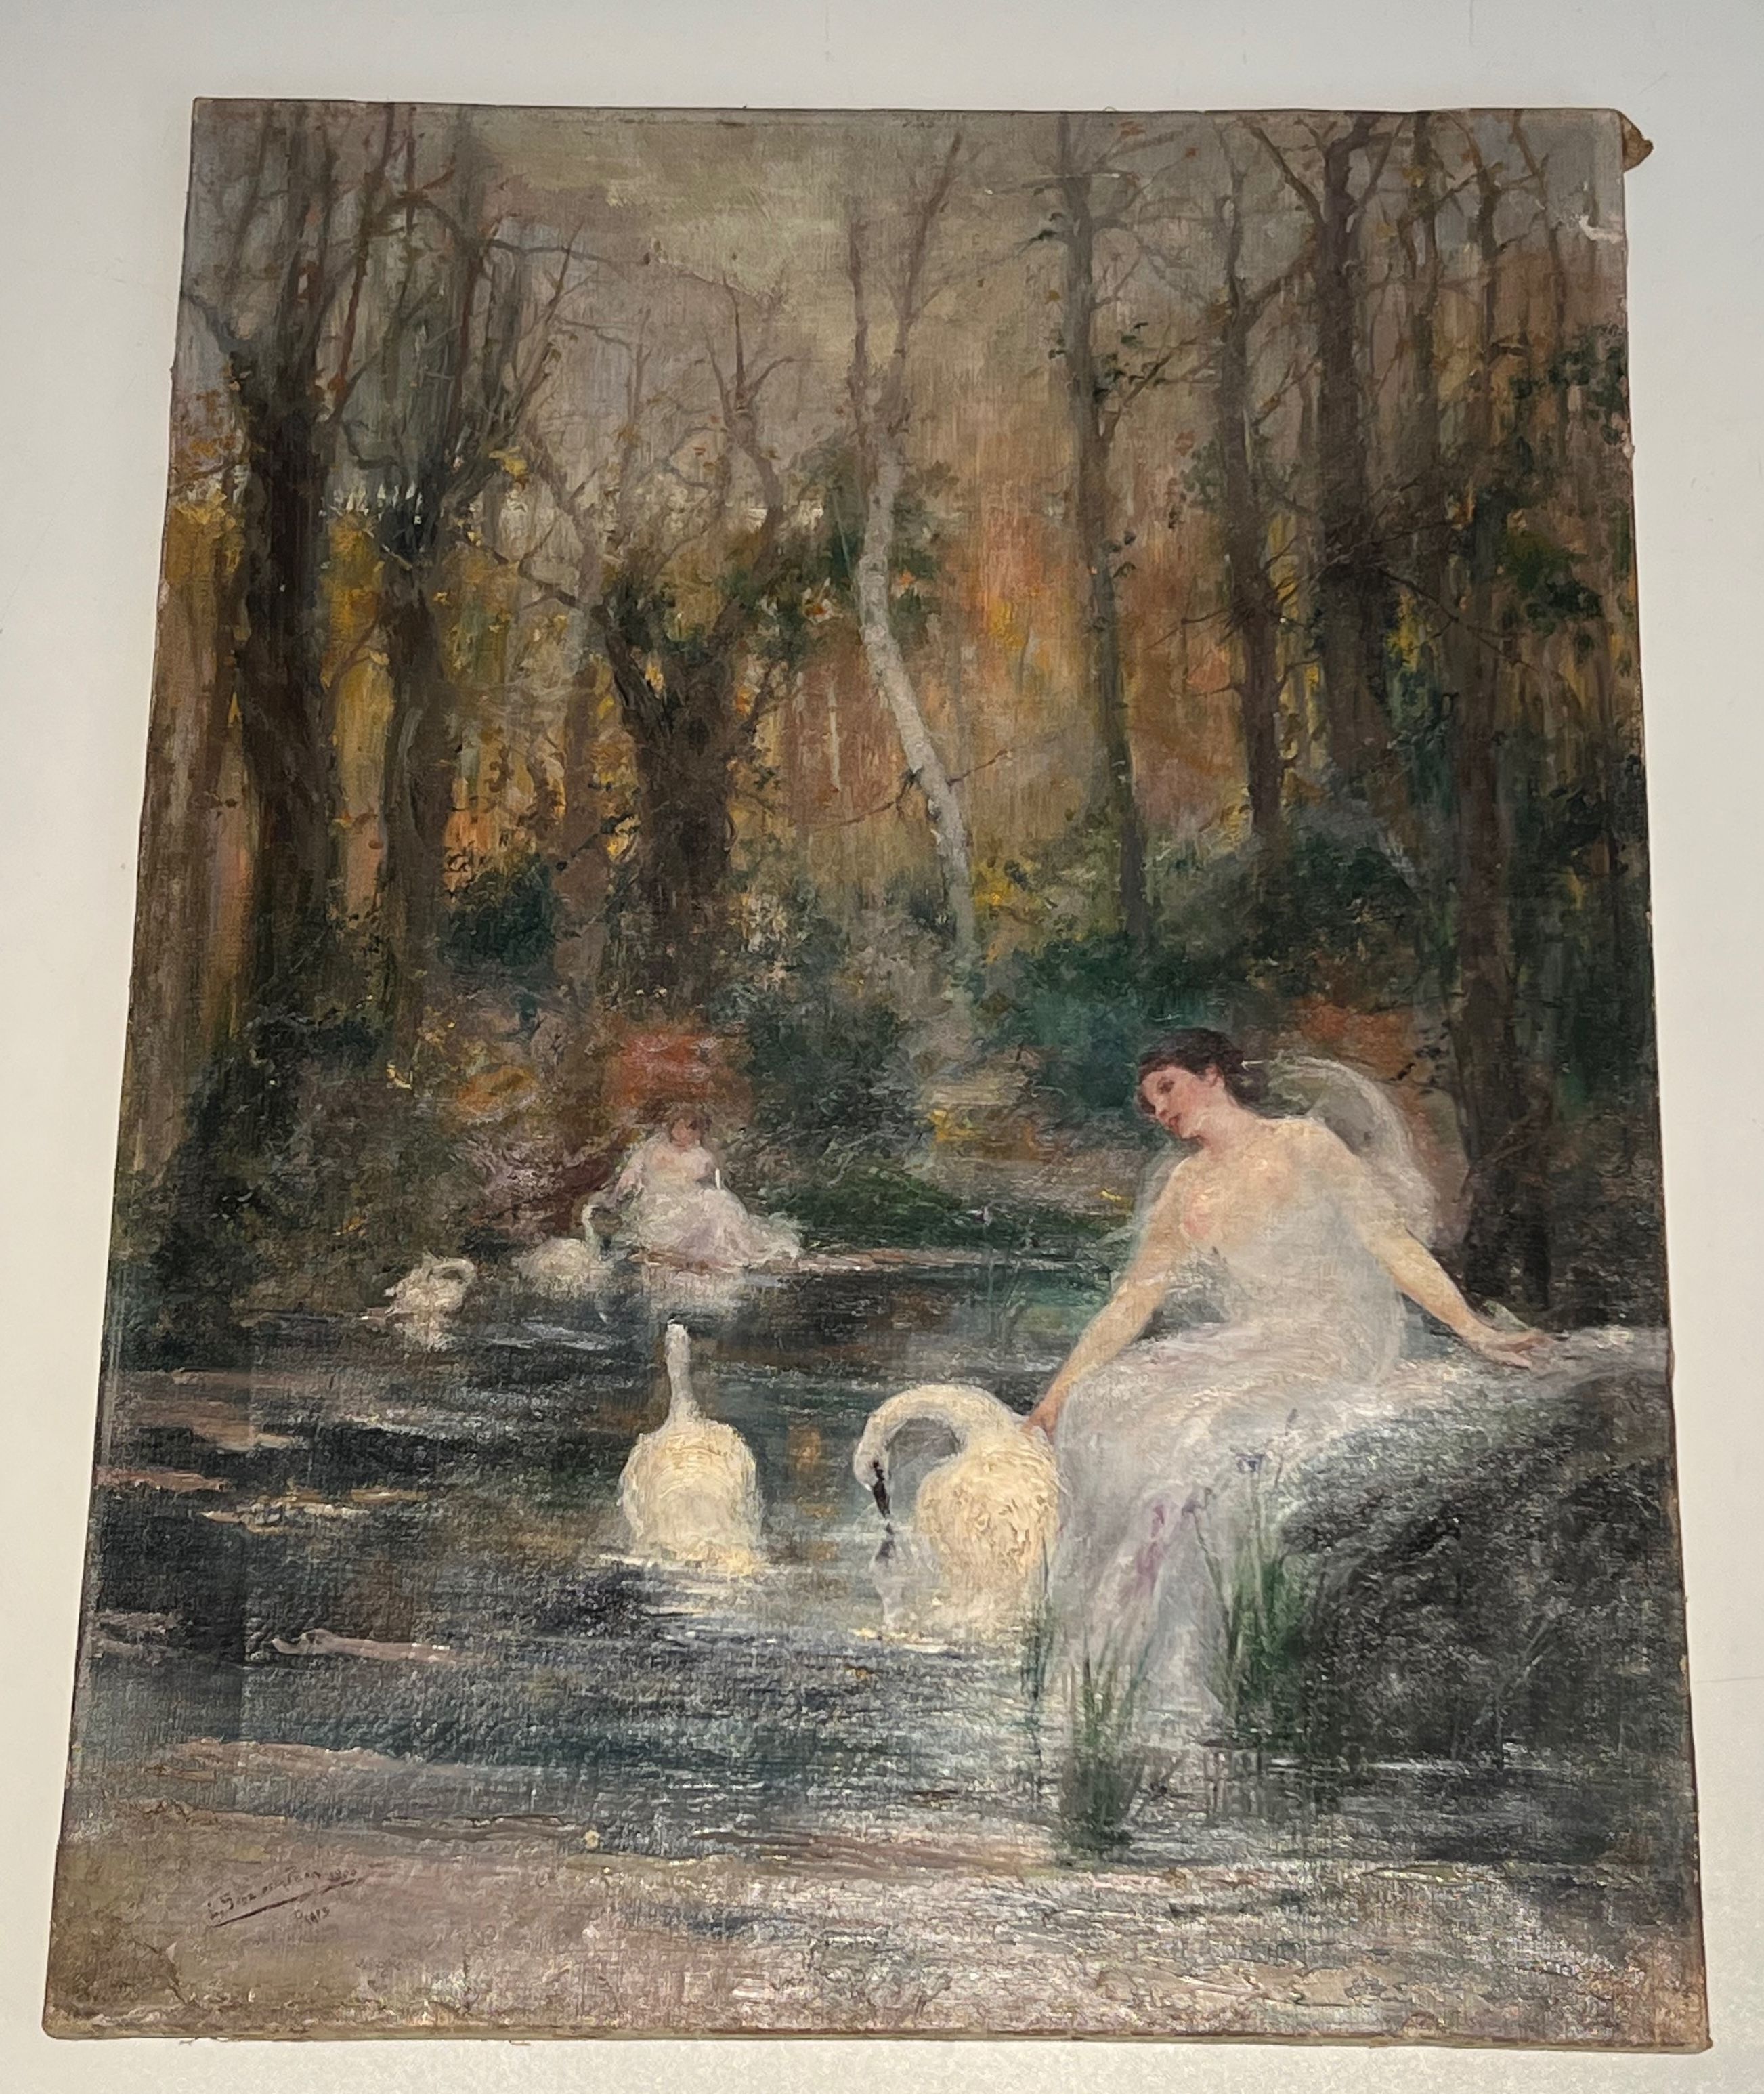 Oil on Canvas "The Woman with the Swan"